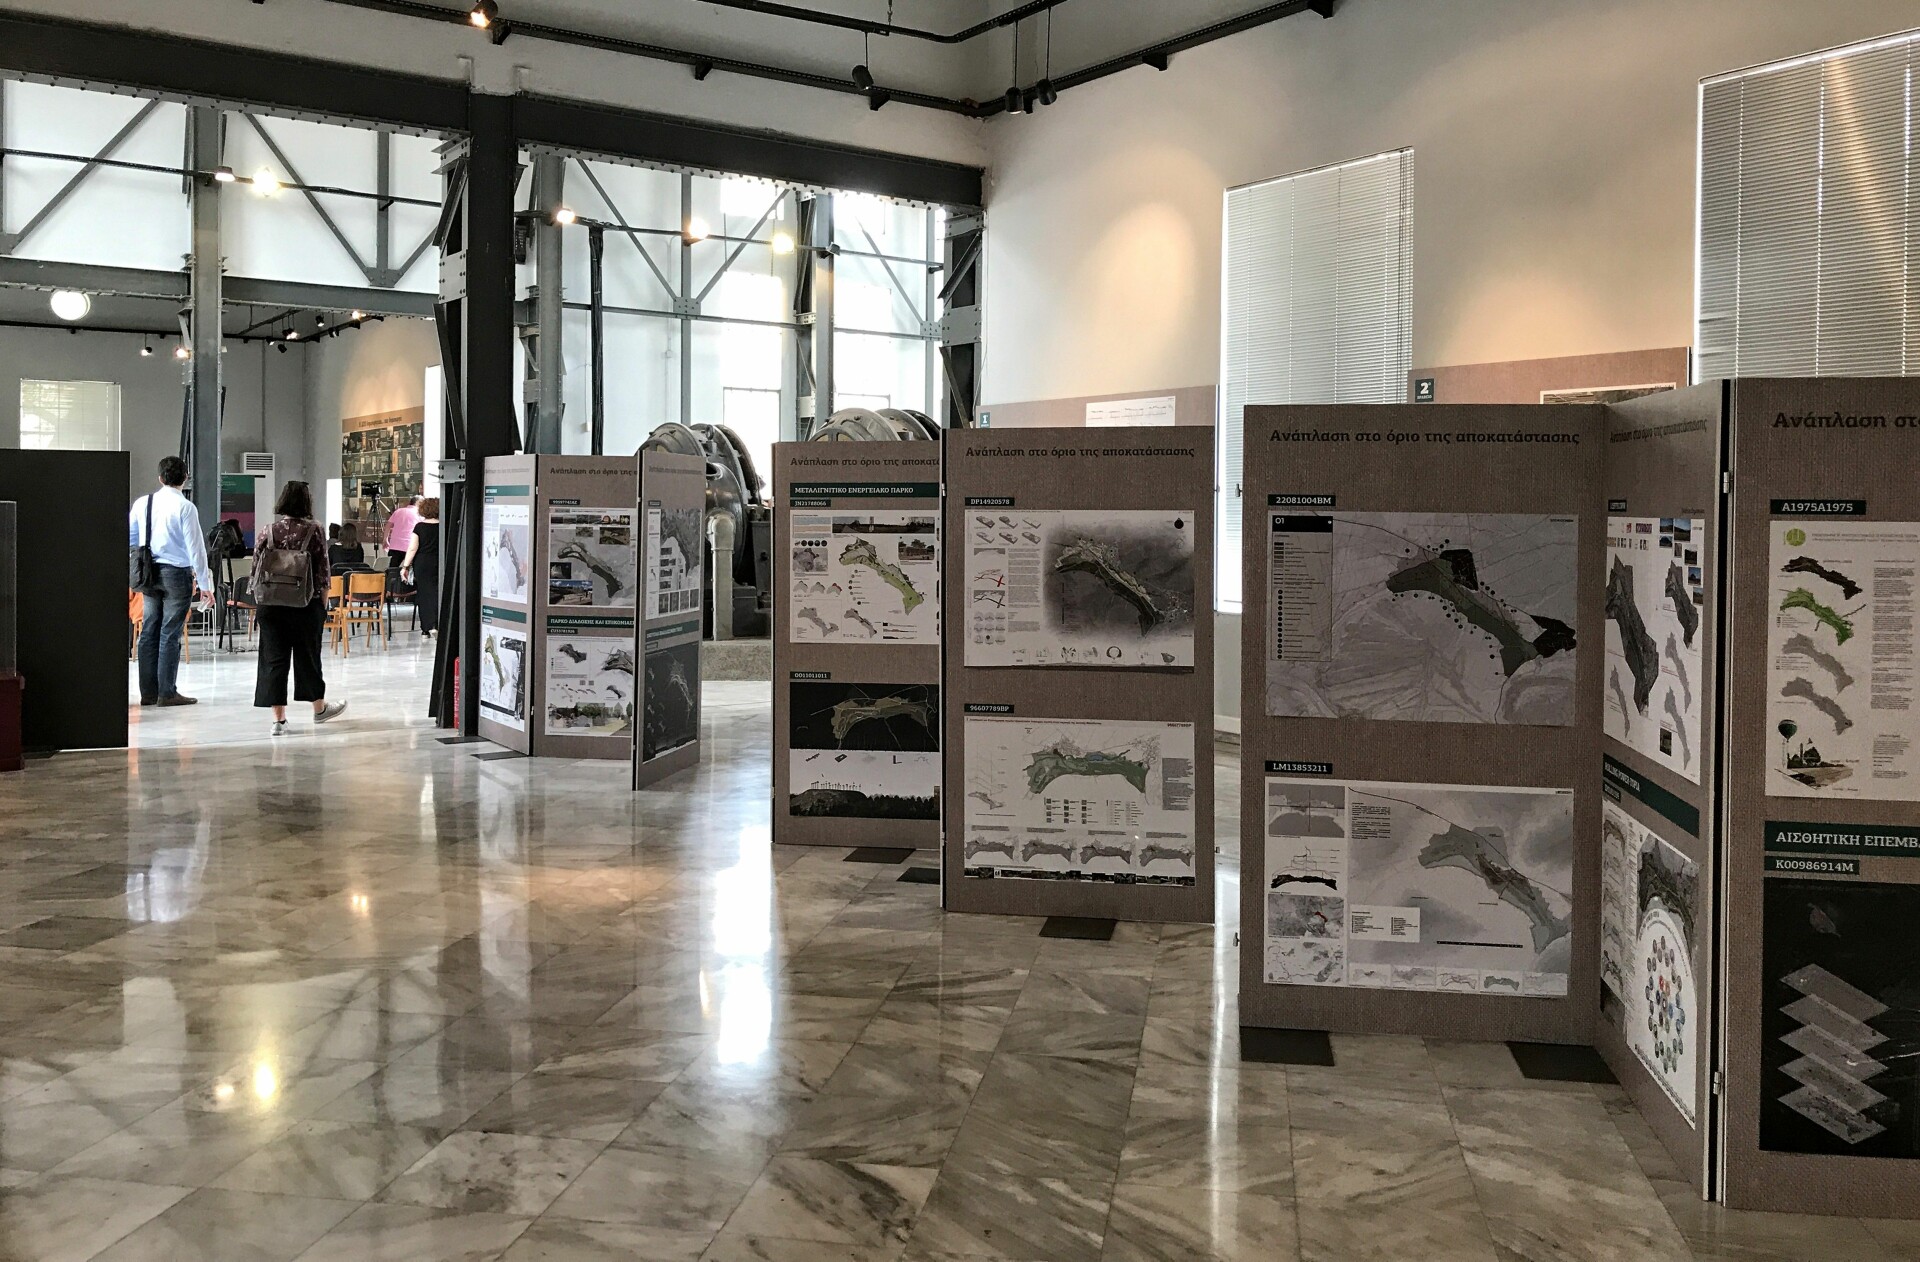 Architecture Exhibition For the Landscape Development to the point of Rehabilitation